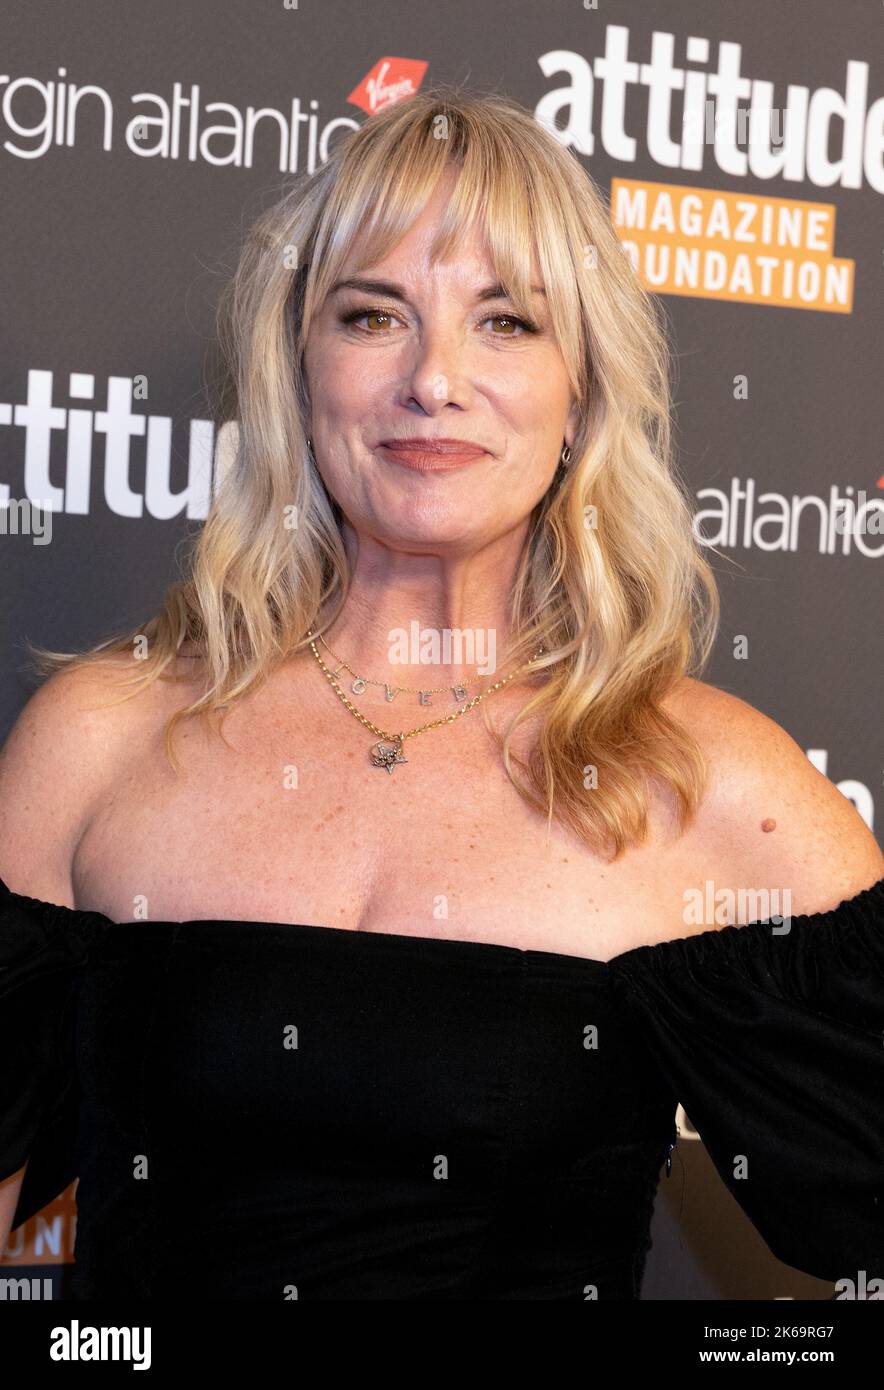 London, UK. 12th Oct, 2022. Tamzin Outhwaite attends the Virgin Attitude Awards at the Roundhouse, London, England Credit: S.A.M./Alamy Live News Stock Photo